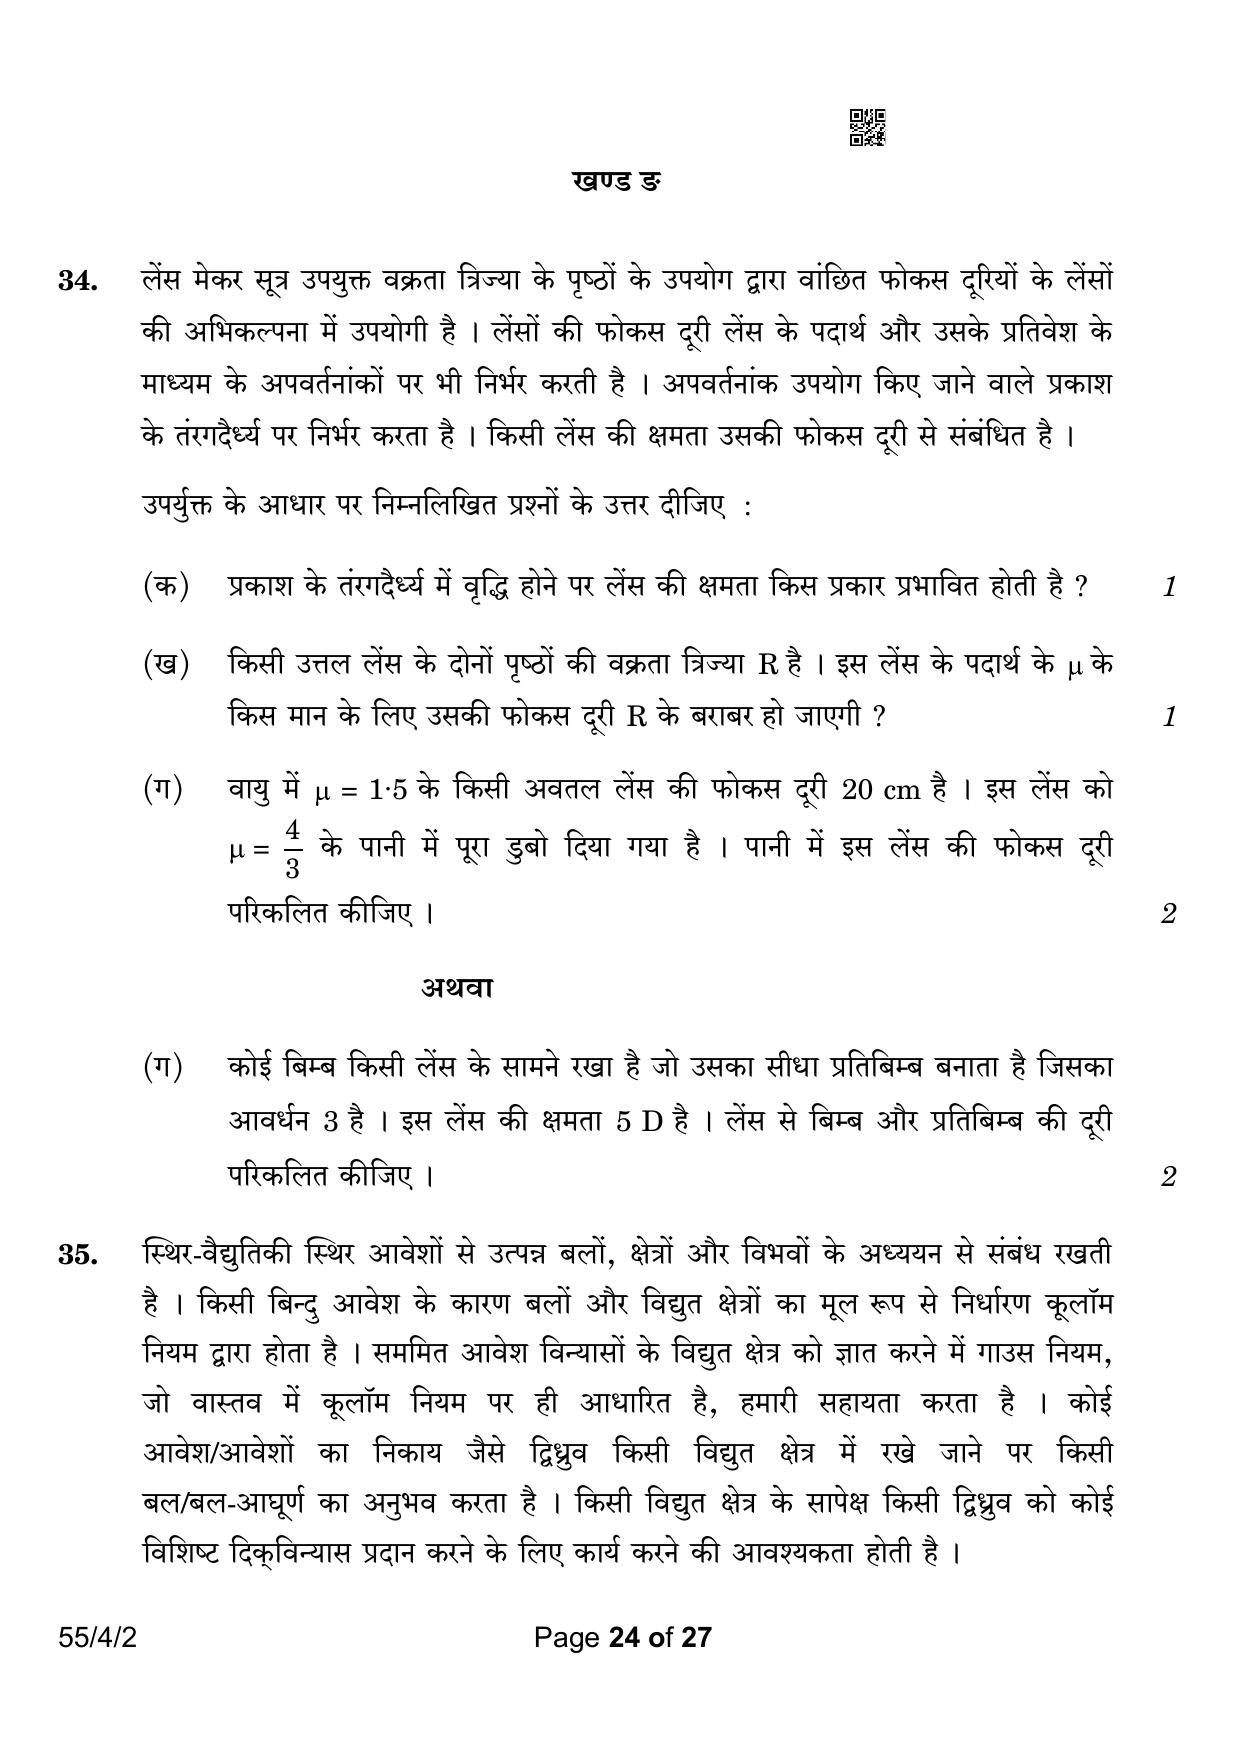 CBSE Class 12 55-4-2 Physics 2023 Question Paper - Page 24